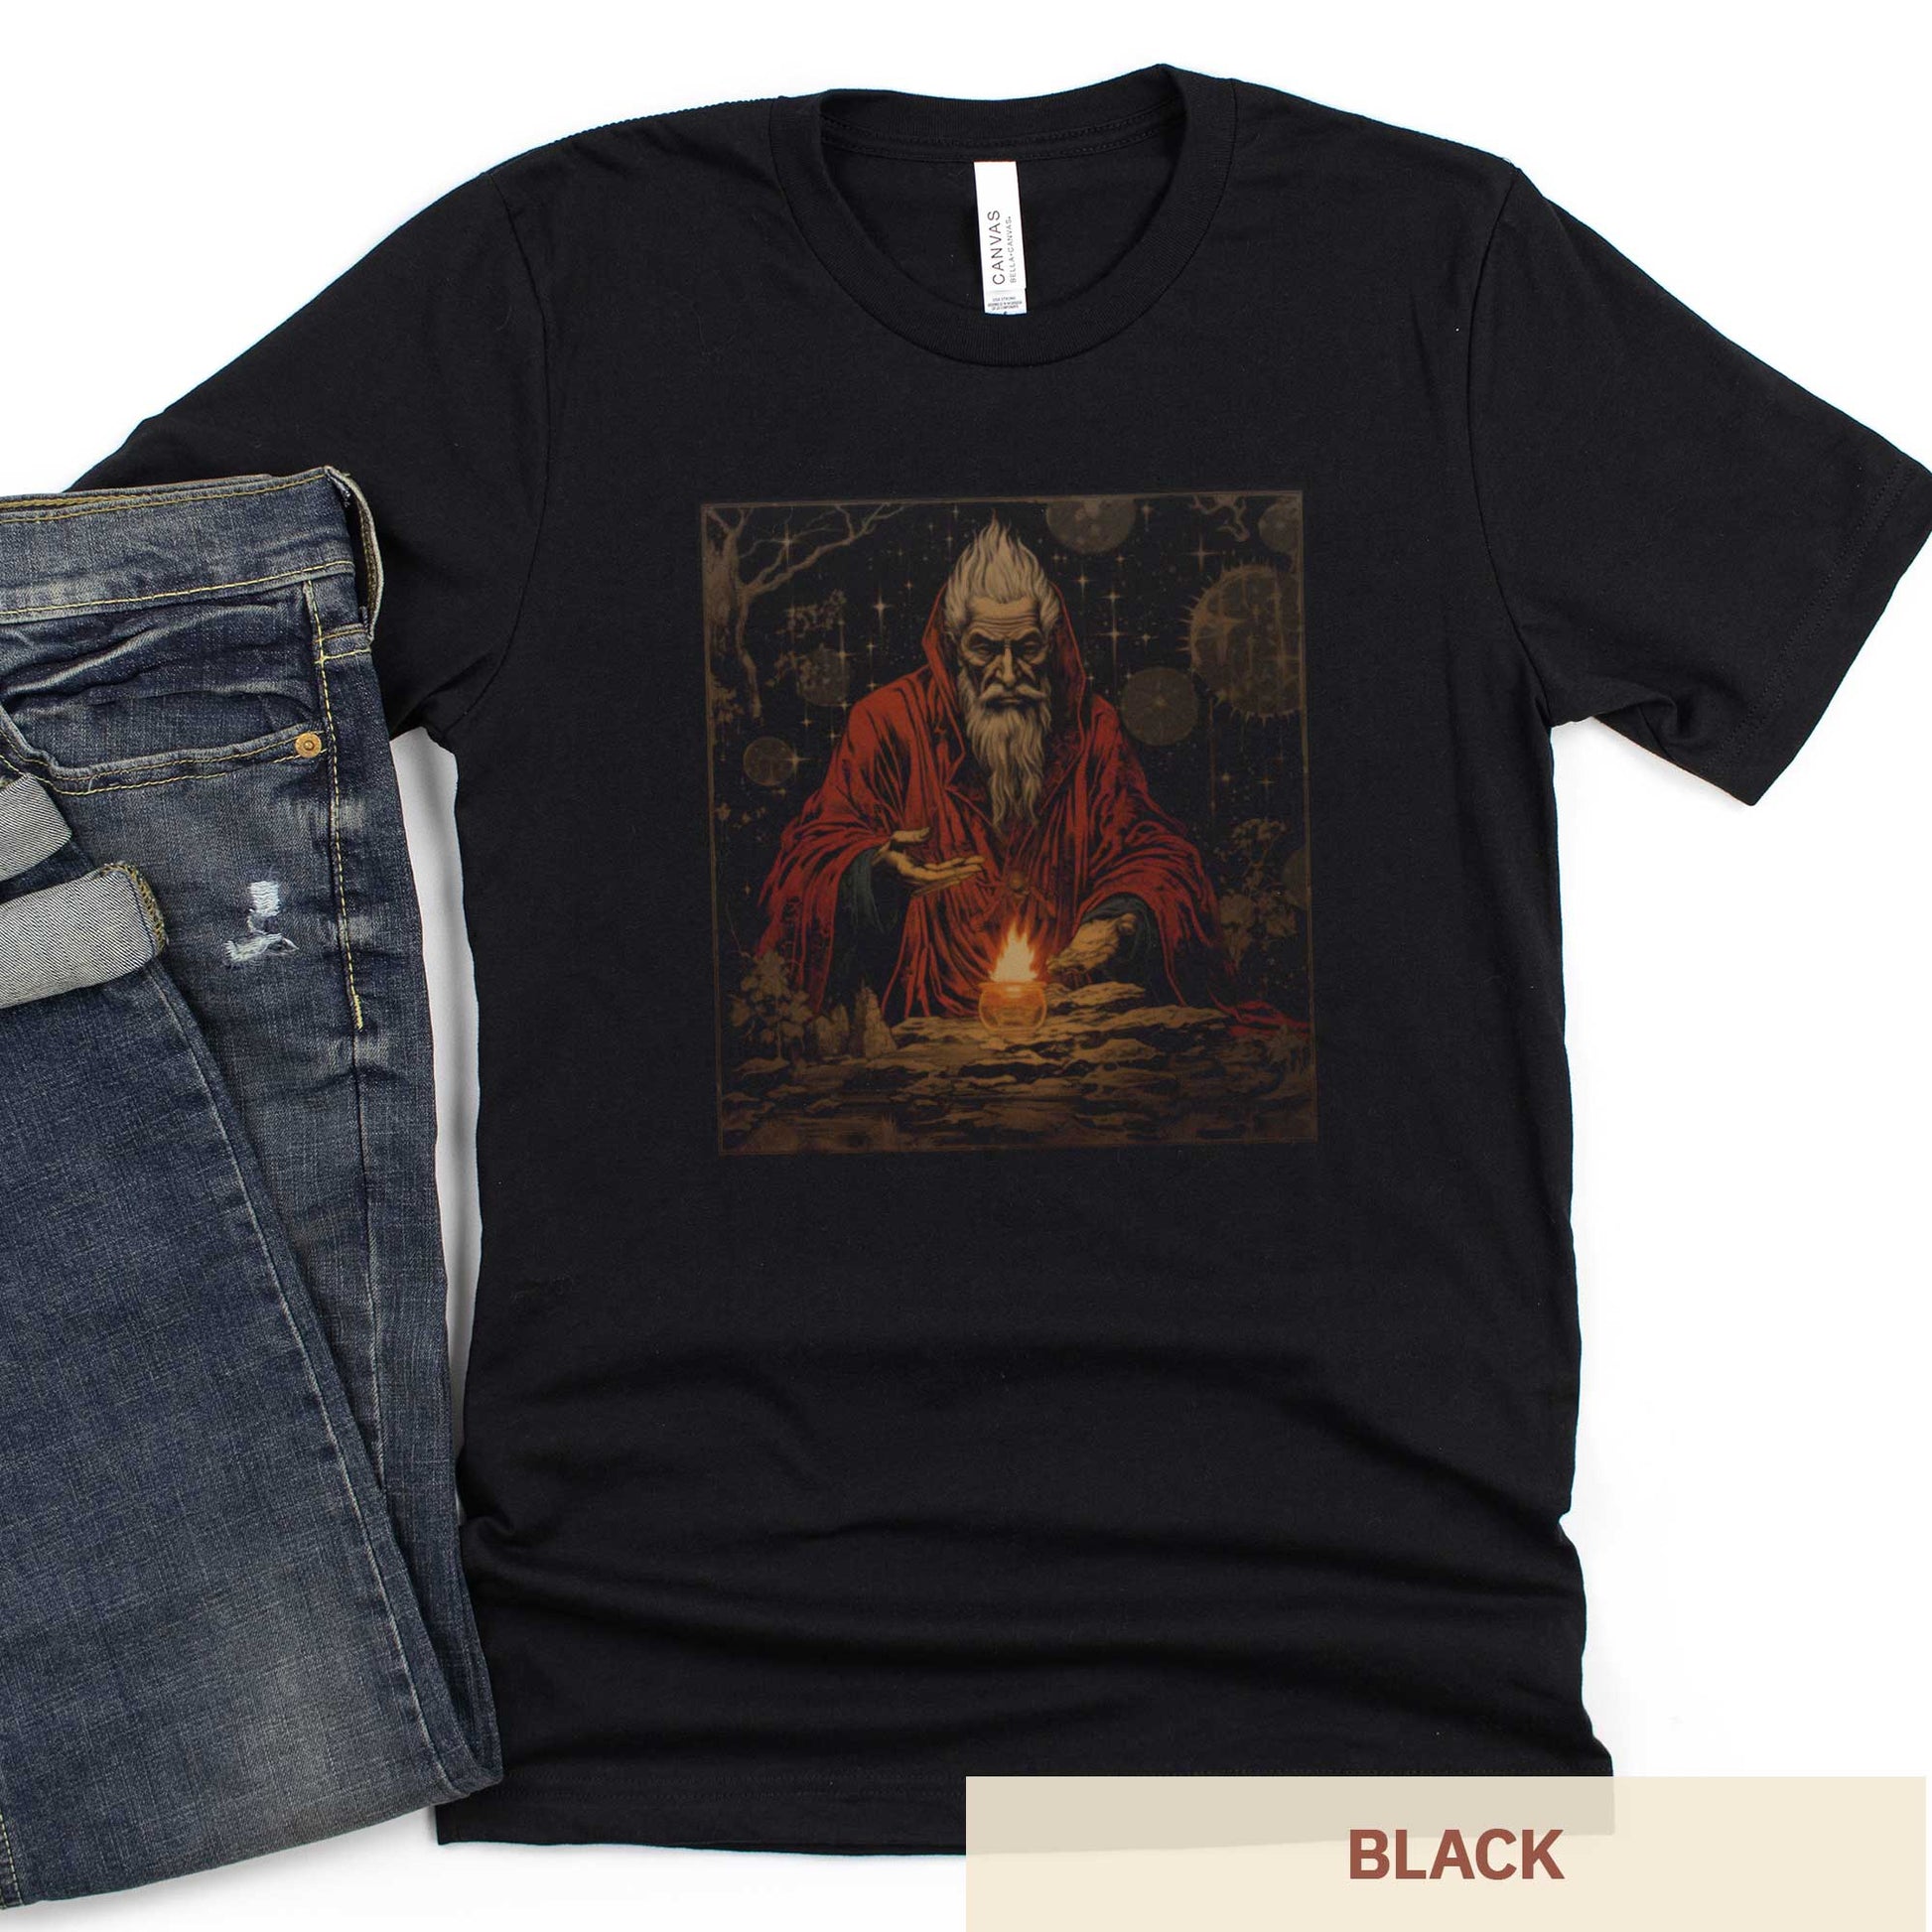 A black Bella Canvas t-shirt featuring a medieval looking sourcerer casting a spell over a small open flame.